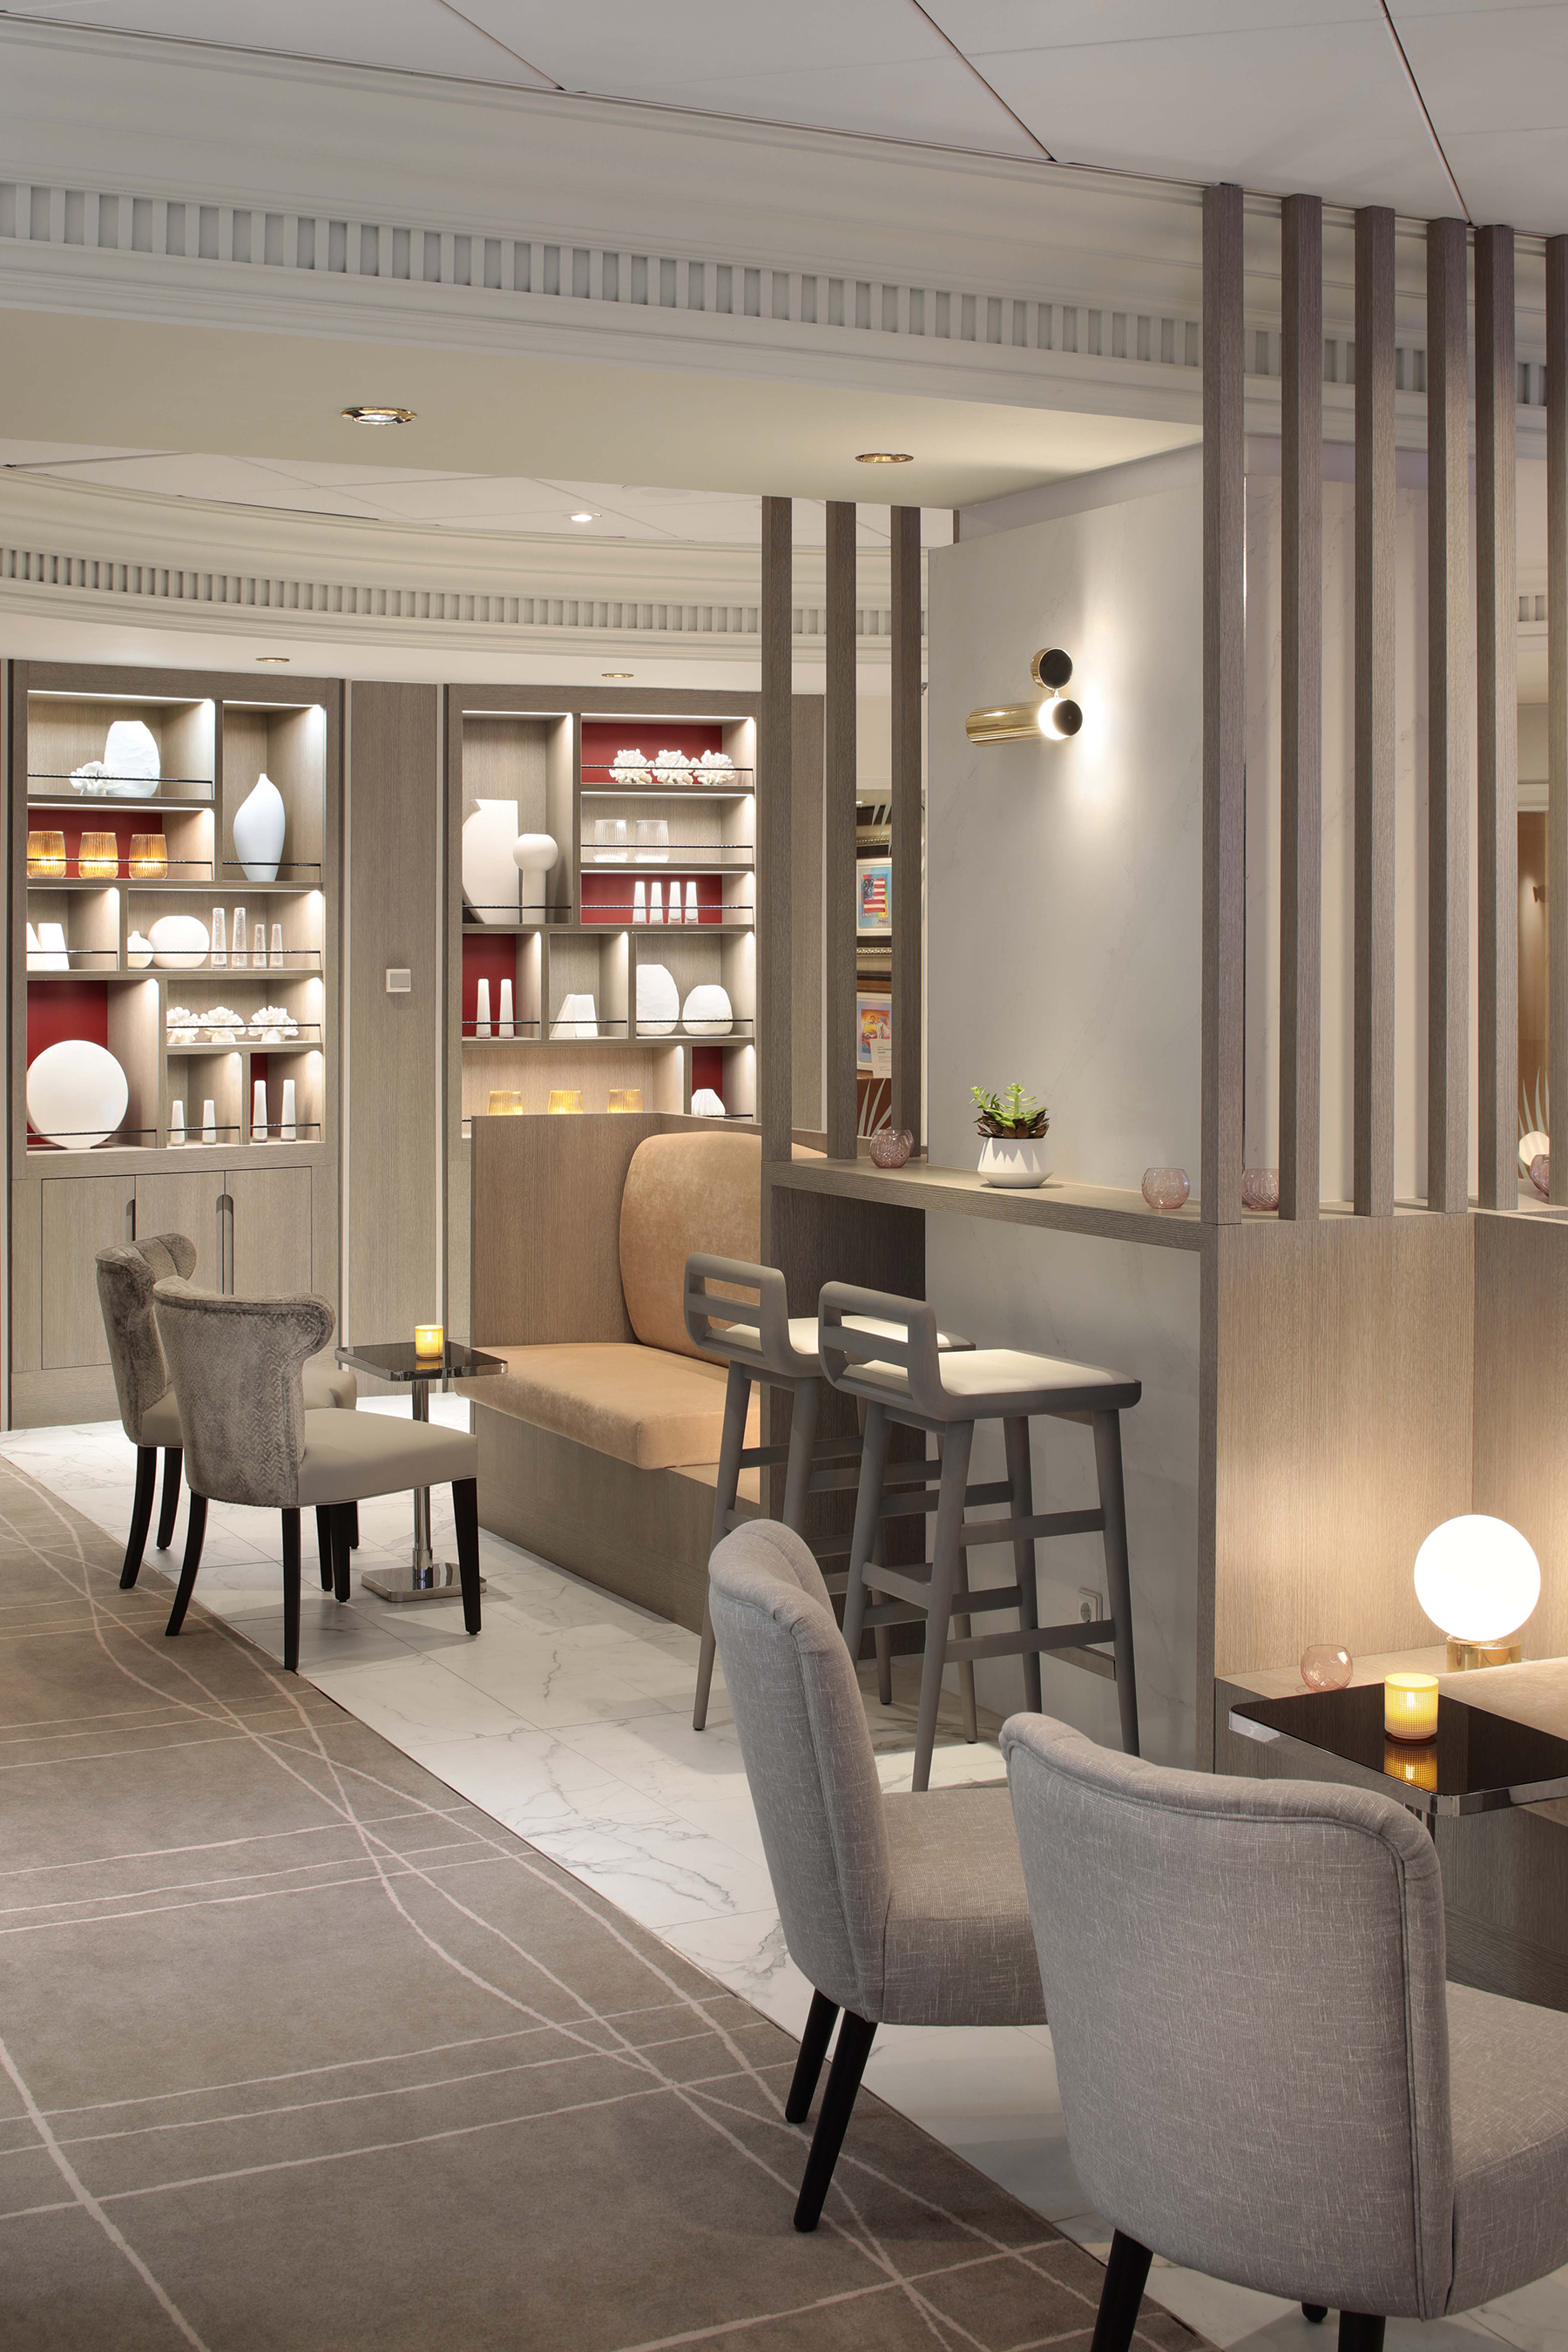 In collaboration with famed interior designer Kelly Hoppen, MBE, Celebrity Cruises revealed The Retreat Lounge, a "revolutionized" haven for suite guests.